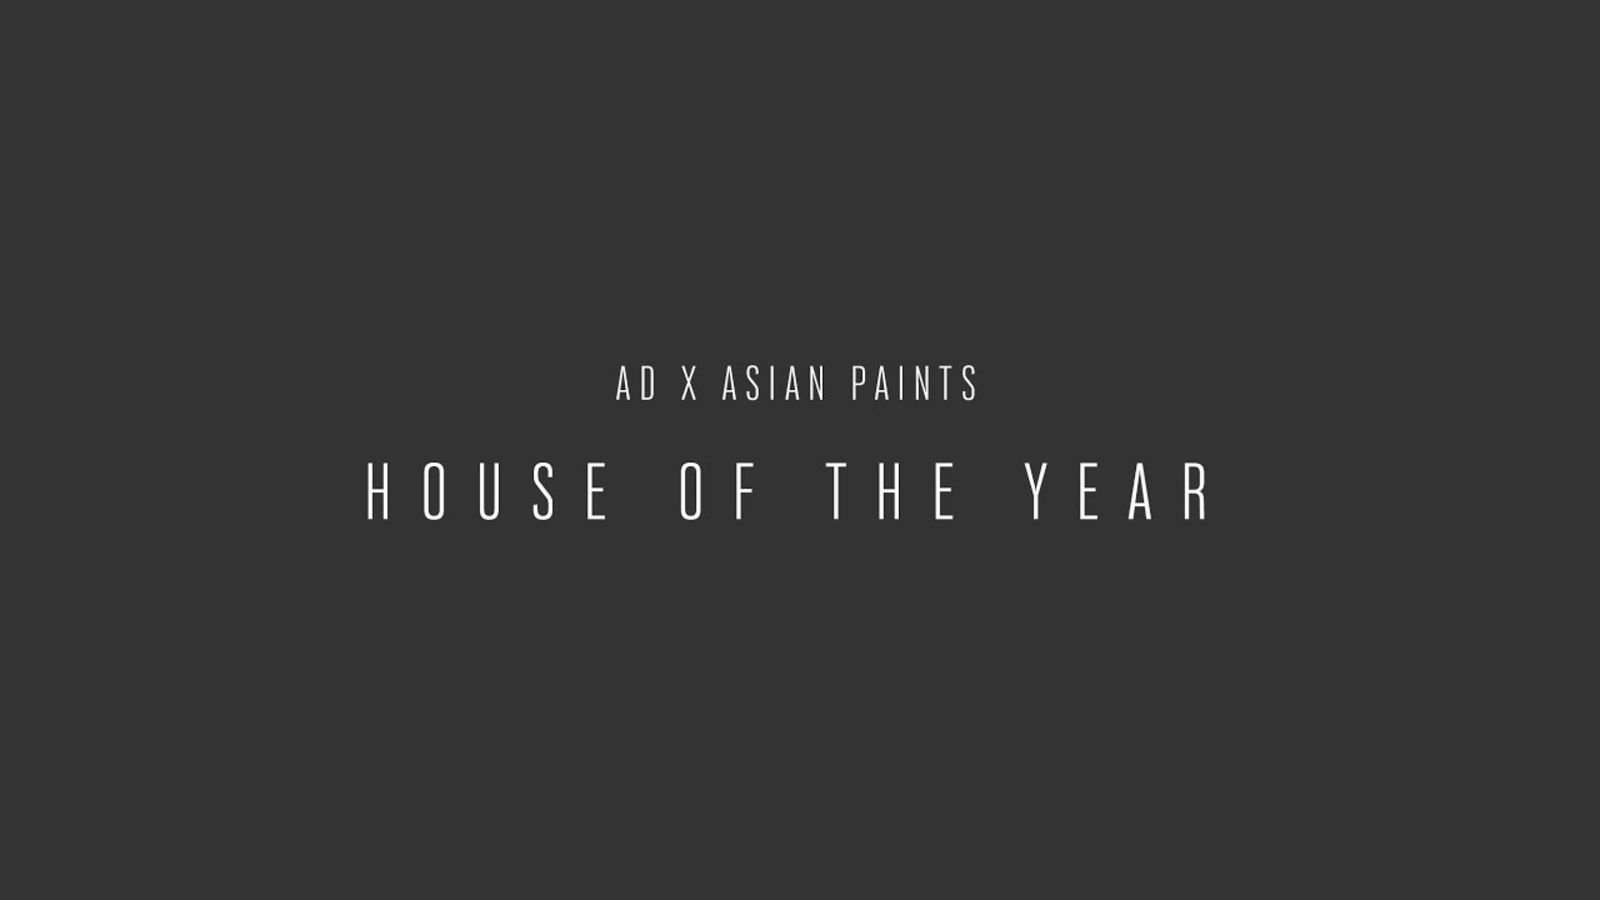 AD100: ADxAsian Paints House of the Year